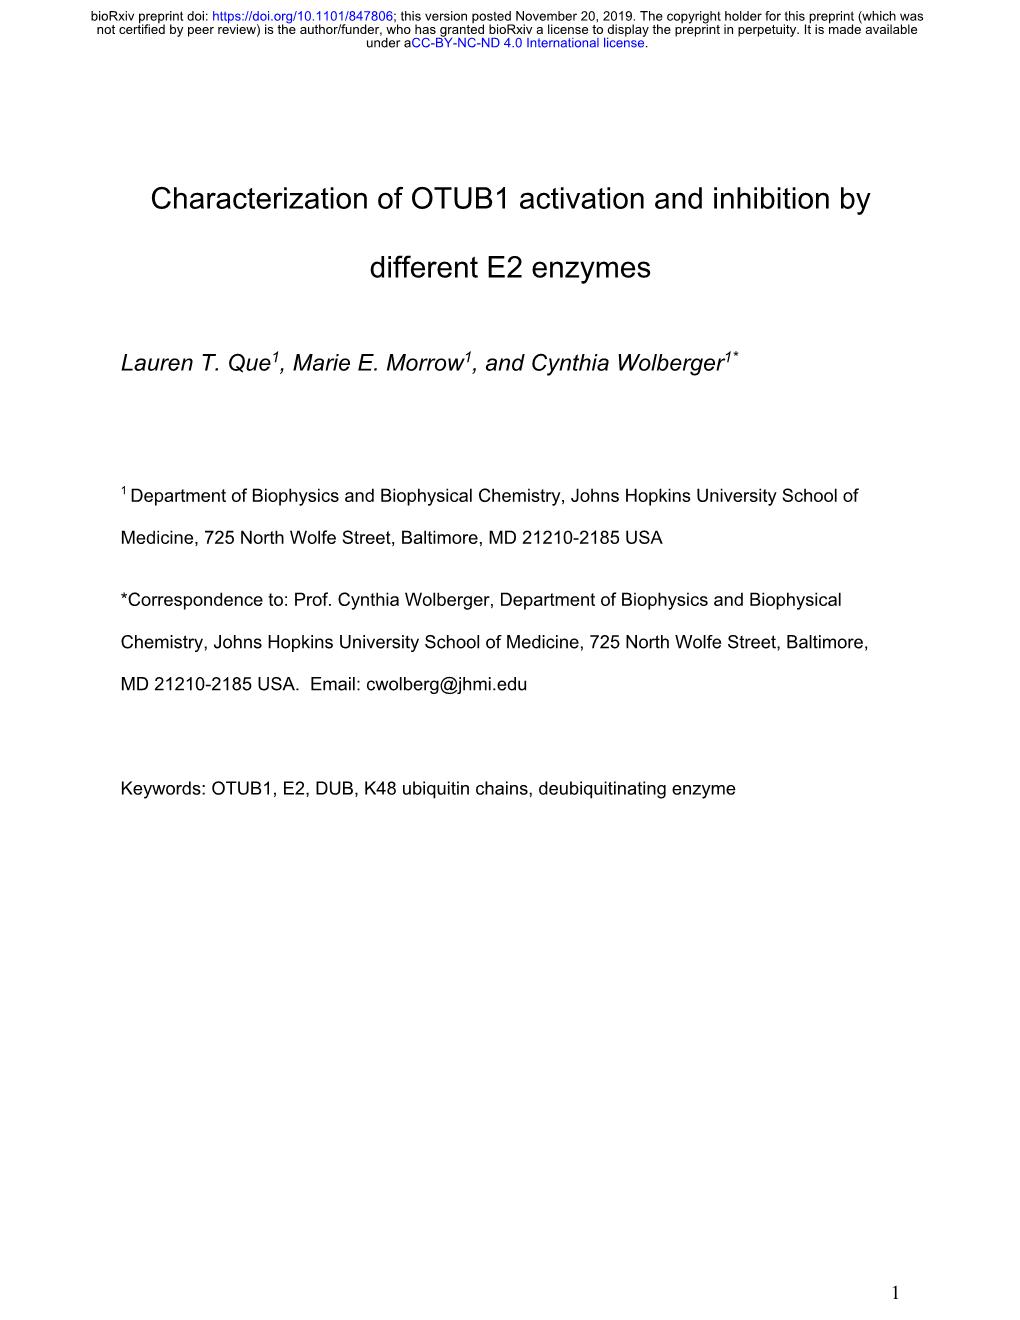 Characterization of OTUB1 Activation and Inhibition by Different E2 Enzymes